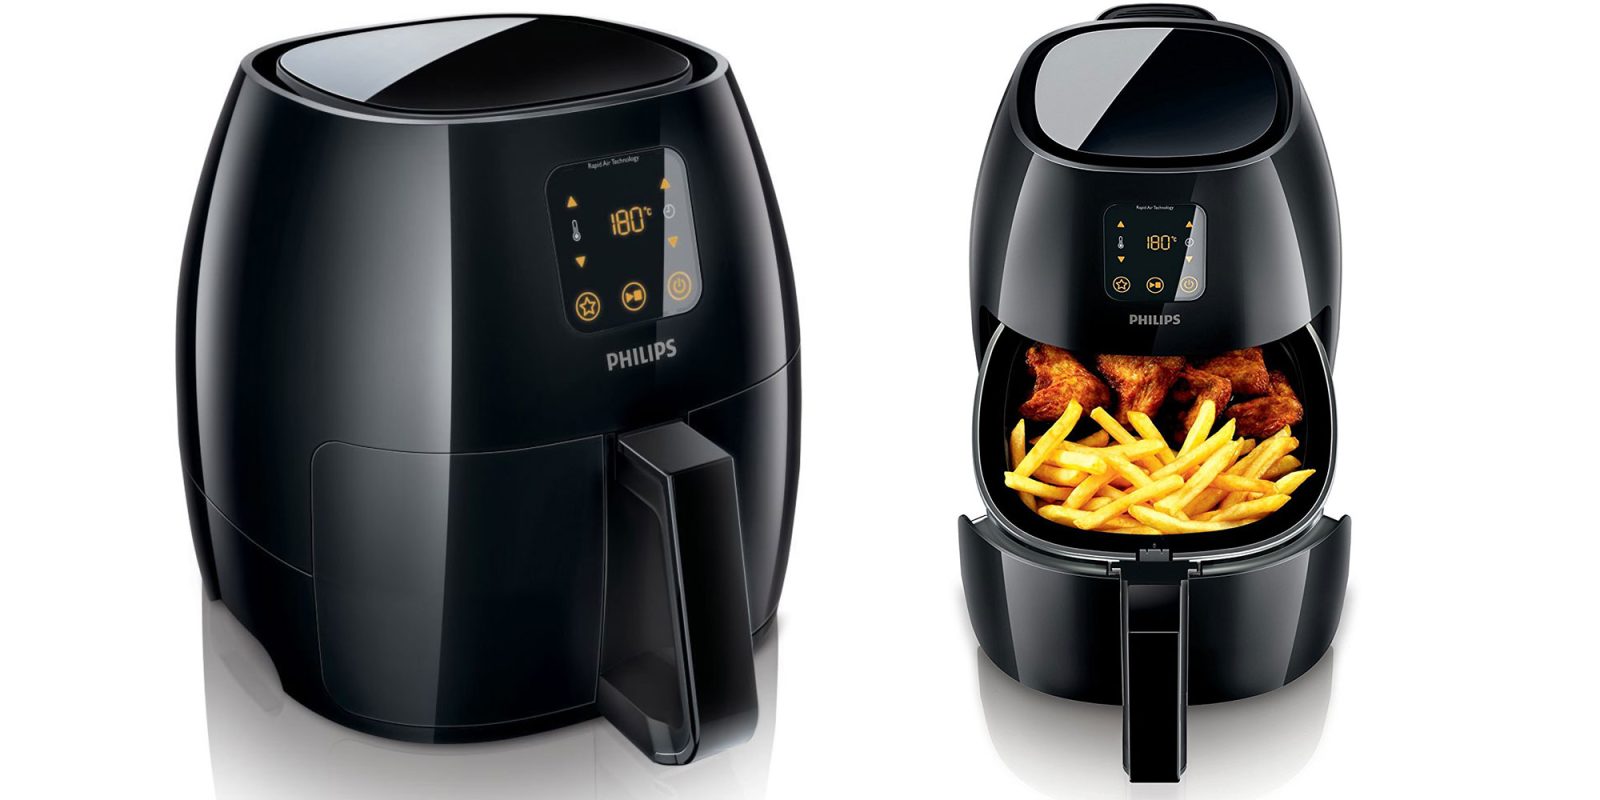 Philips Air Fryer Accessories : Philips Grillrek voor Airfryer XL - DVN Puntenplein / Philips is the original inventor of the air fryer, and they've mastered the technology.